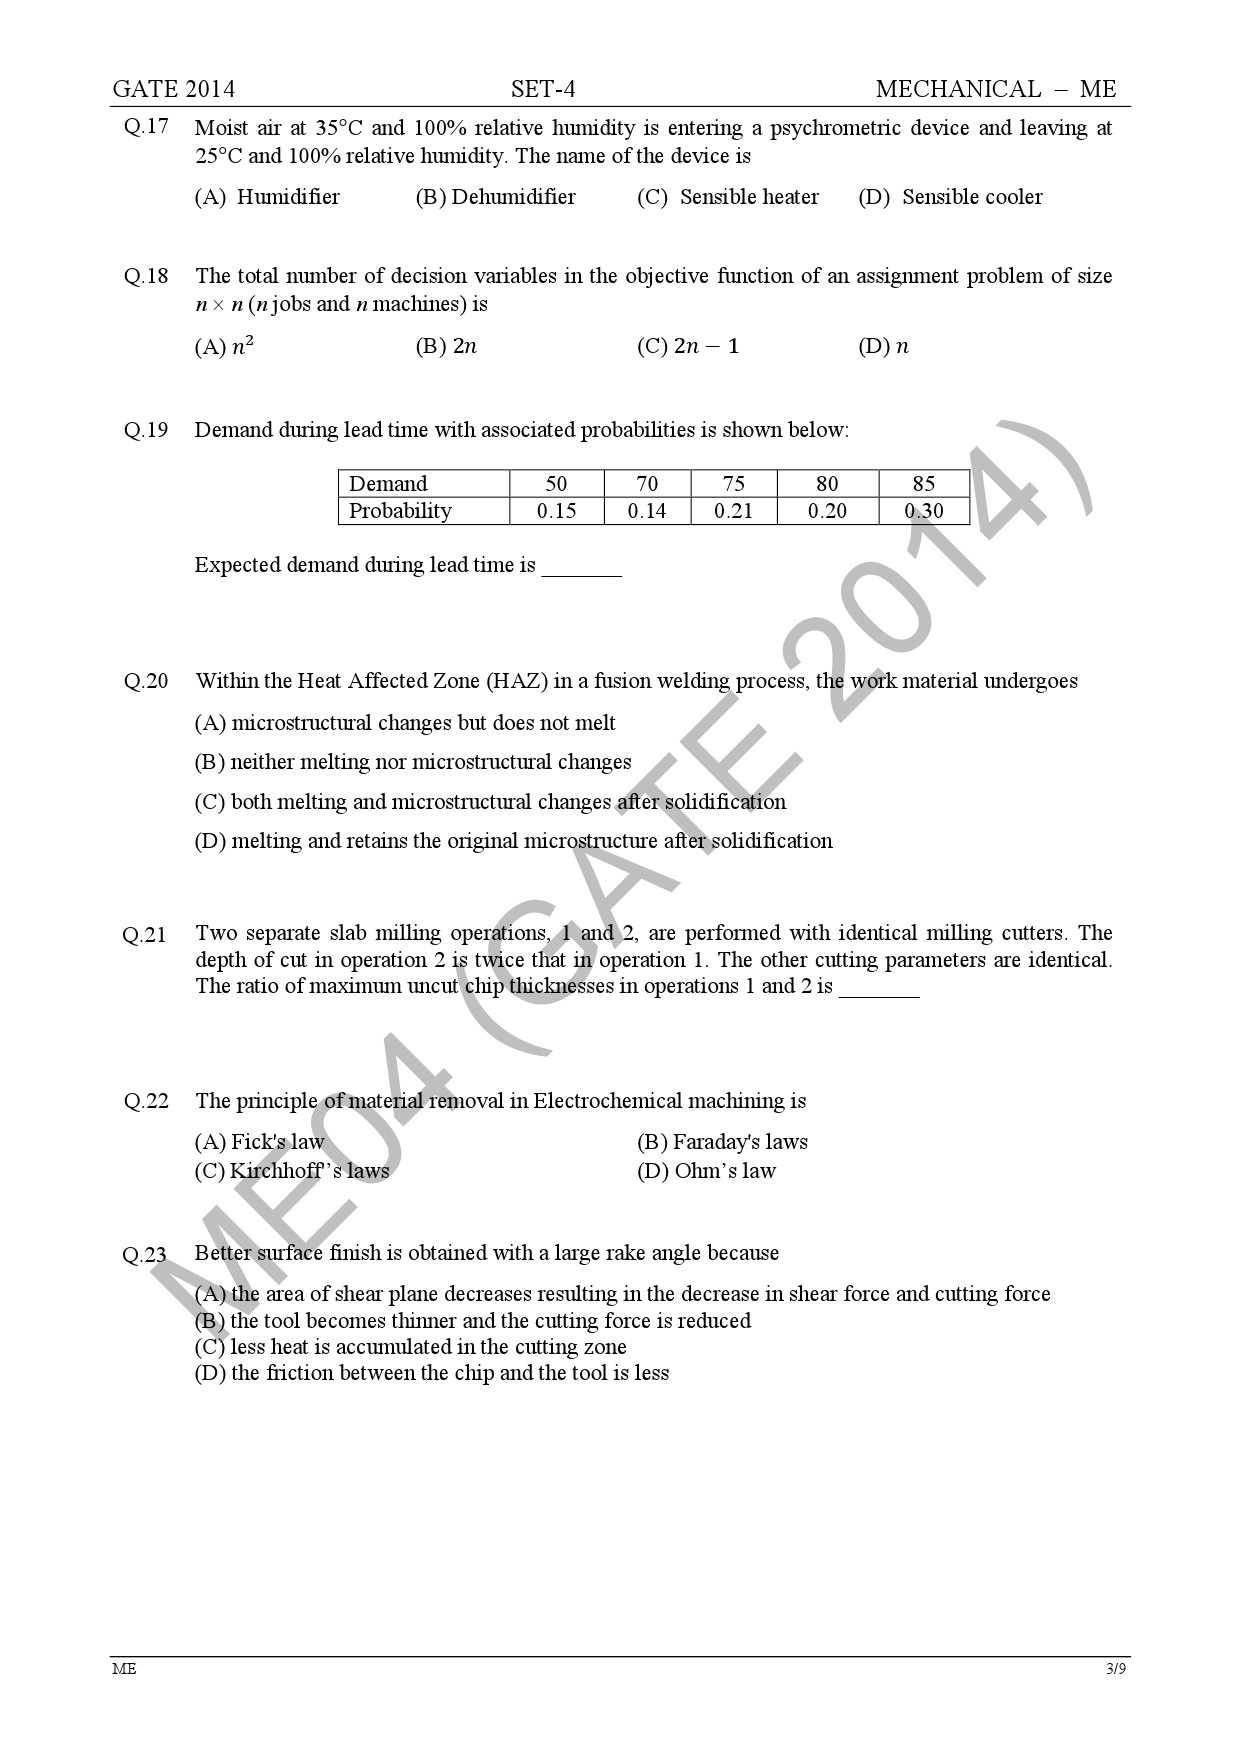 GATE Exam Question Paper 2014 Mechanical Engineering Set 4 9